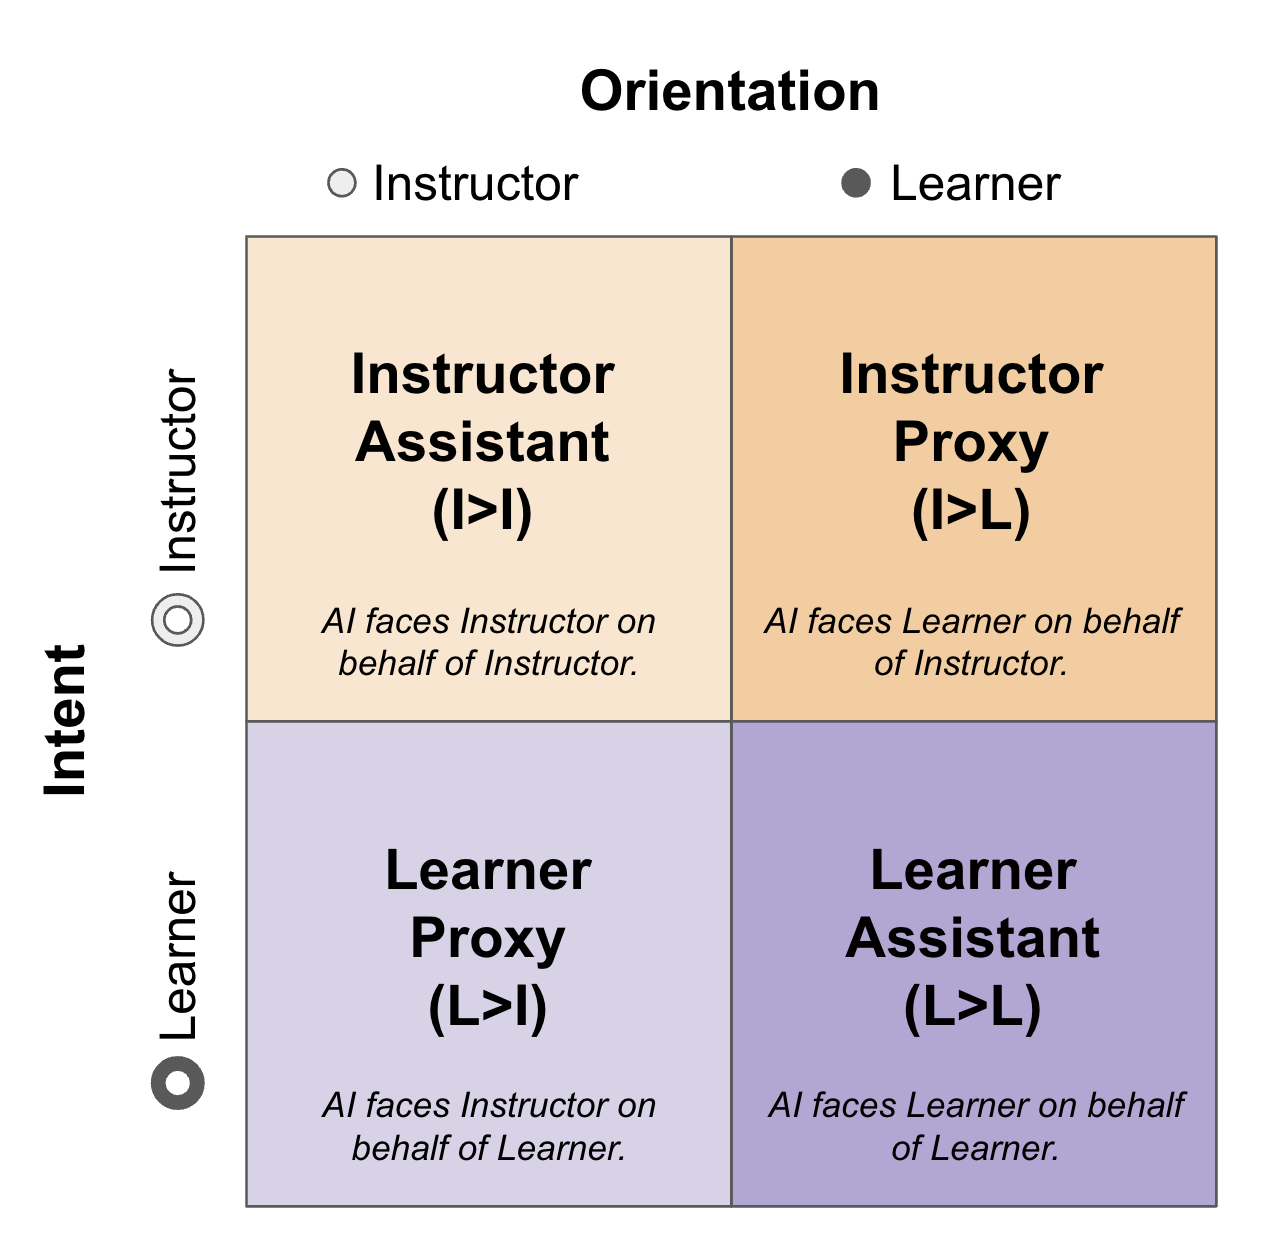 Instructor Orientation/Instructor Intent | Instructor Assistant (I>I): AI faces Instructor on behalf of Instructor. Learner Orientation/Instructor Intent | Instructor Intent (I>L): AI faces Learner on behalf of Instructor. Instructor Orientation/Learner Intent (L>I): AI faces Instructor on beahalf of Learner. Learner Orientation/Learner Intent (L>L): AI faces Learner on behalf of Learner.